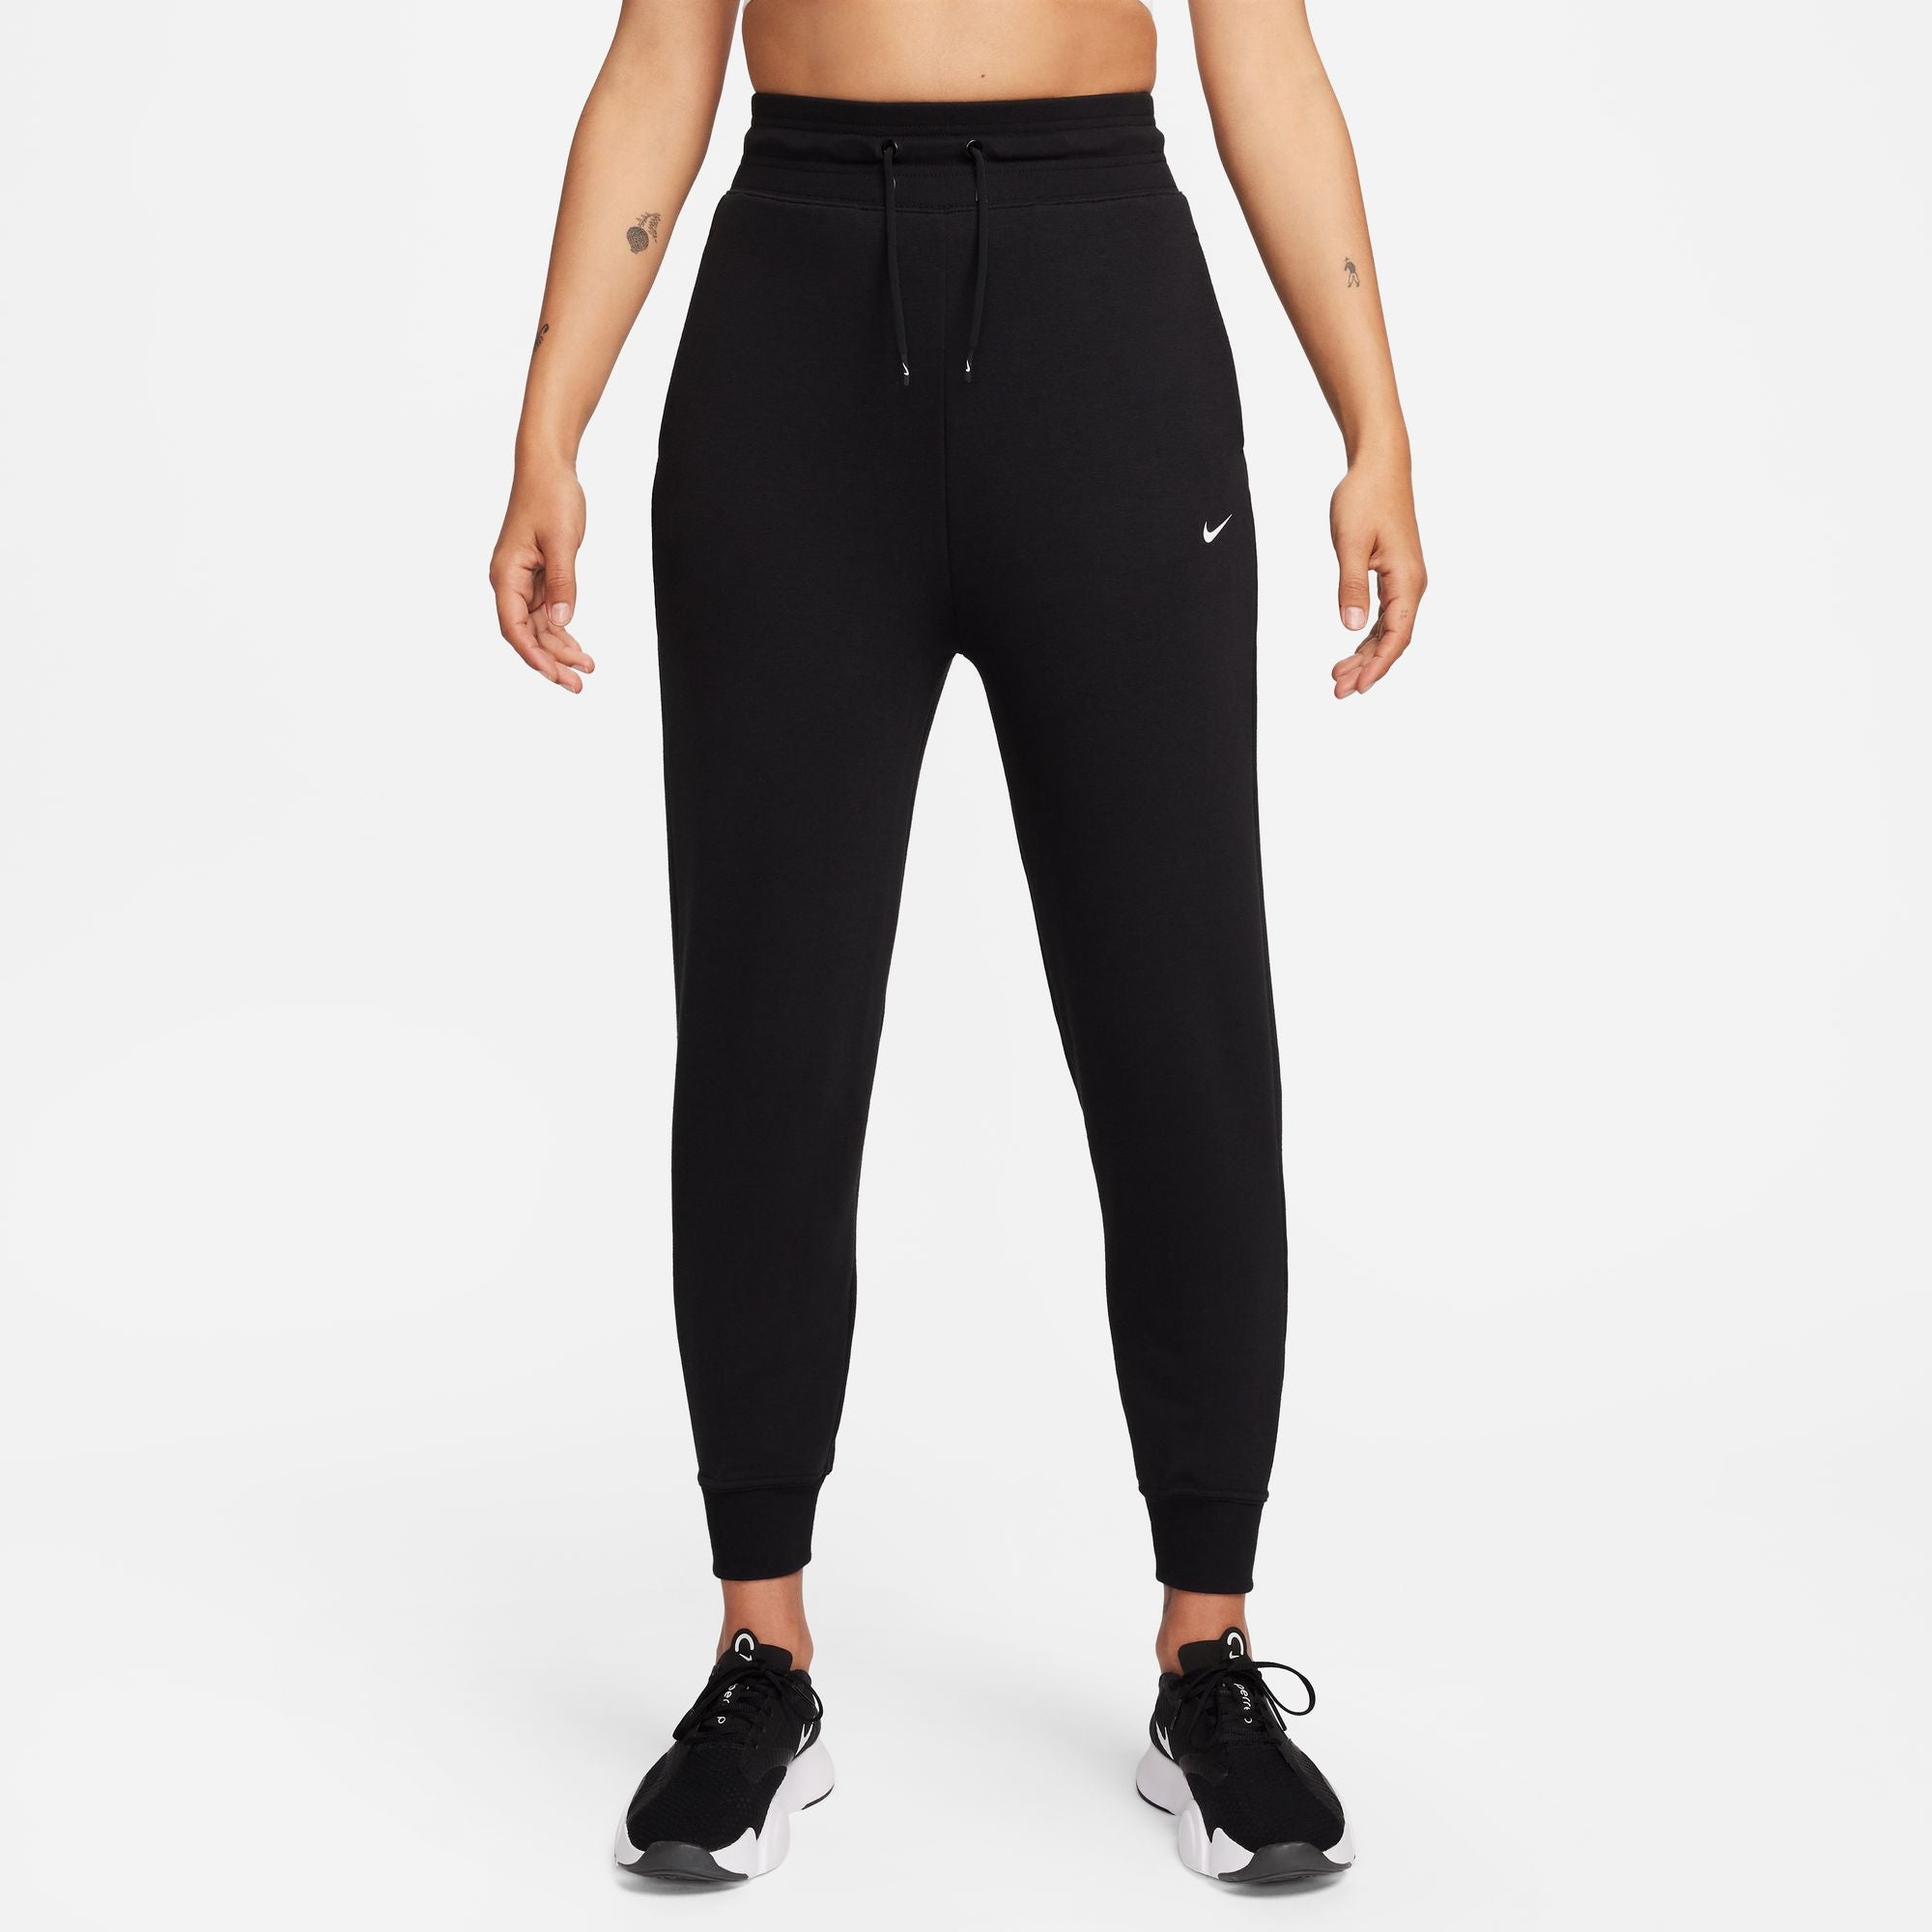 Nike Sportswear Chill Terry Women's Slim High-Waisted French Terry